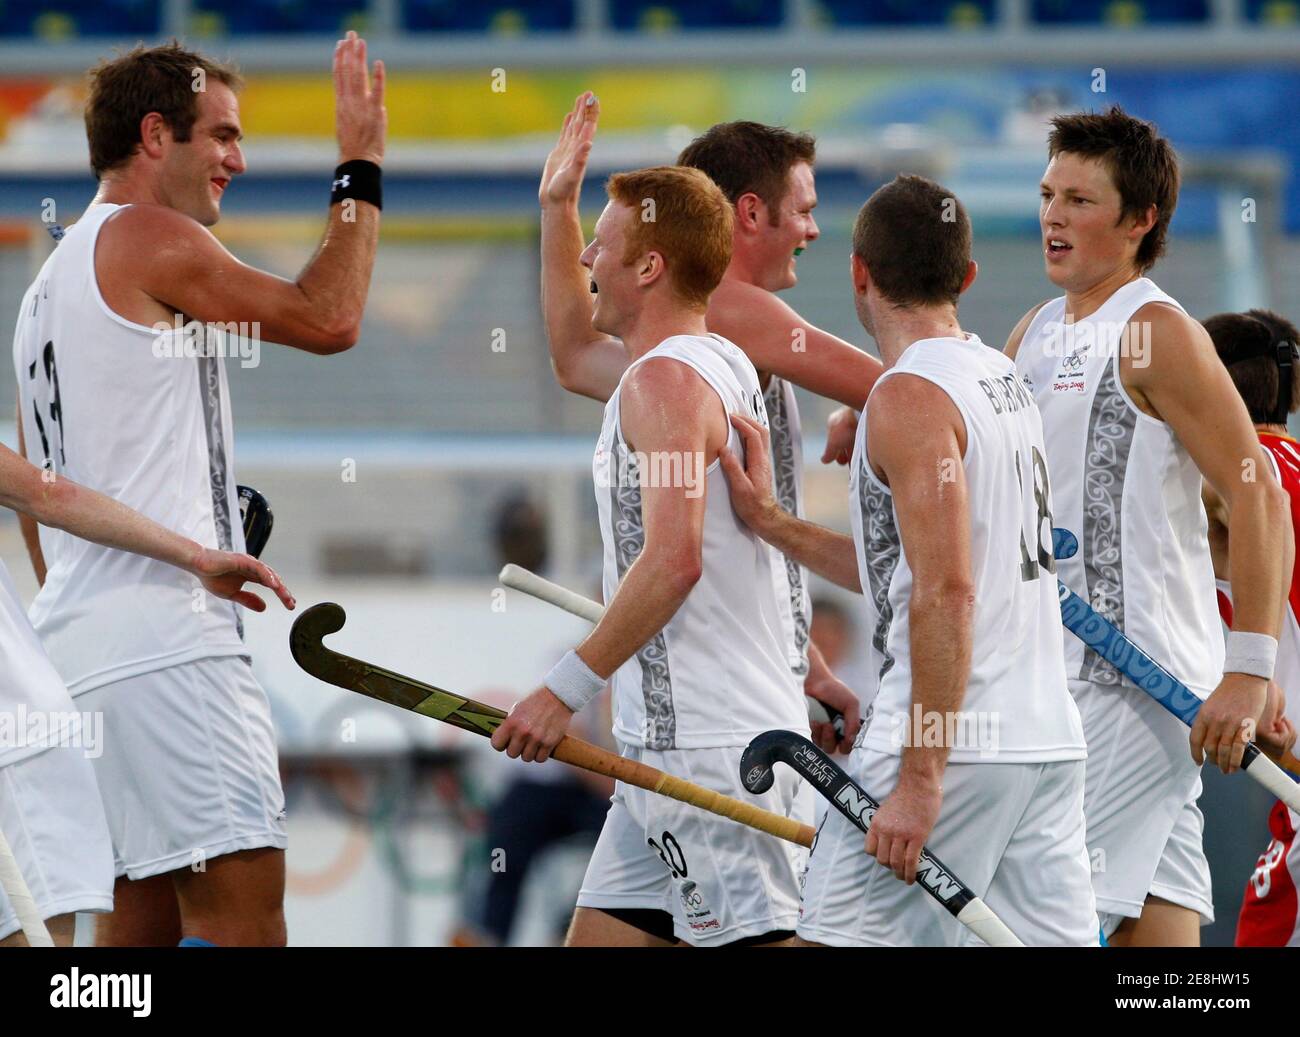 Benjamin Collier of New Zealand and team mates celebrate a goal during their men's pool MA hockey match against Belgium at the Beijing 2008 Olympic Games August 15, 2008.     REUTERS/Oleg Popov (CHINA) Stock Photo